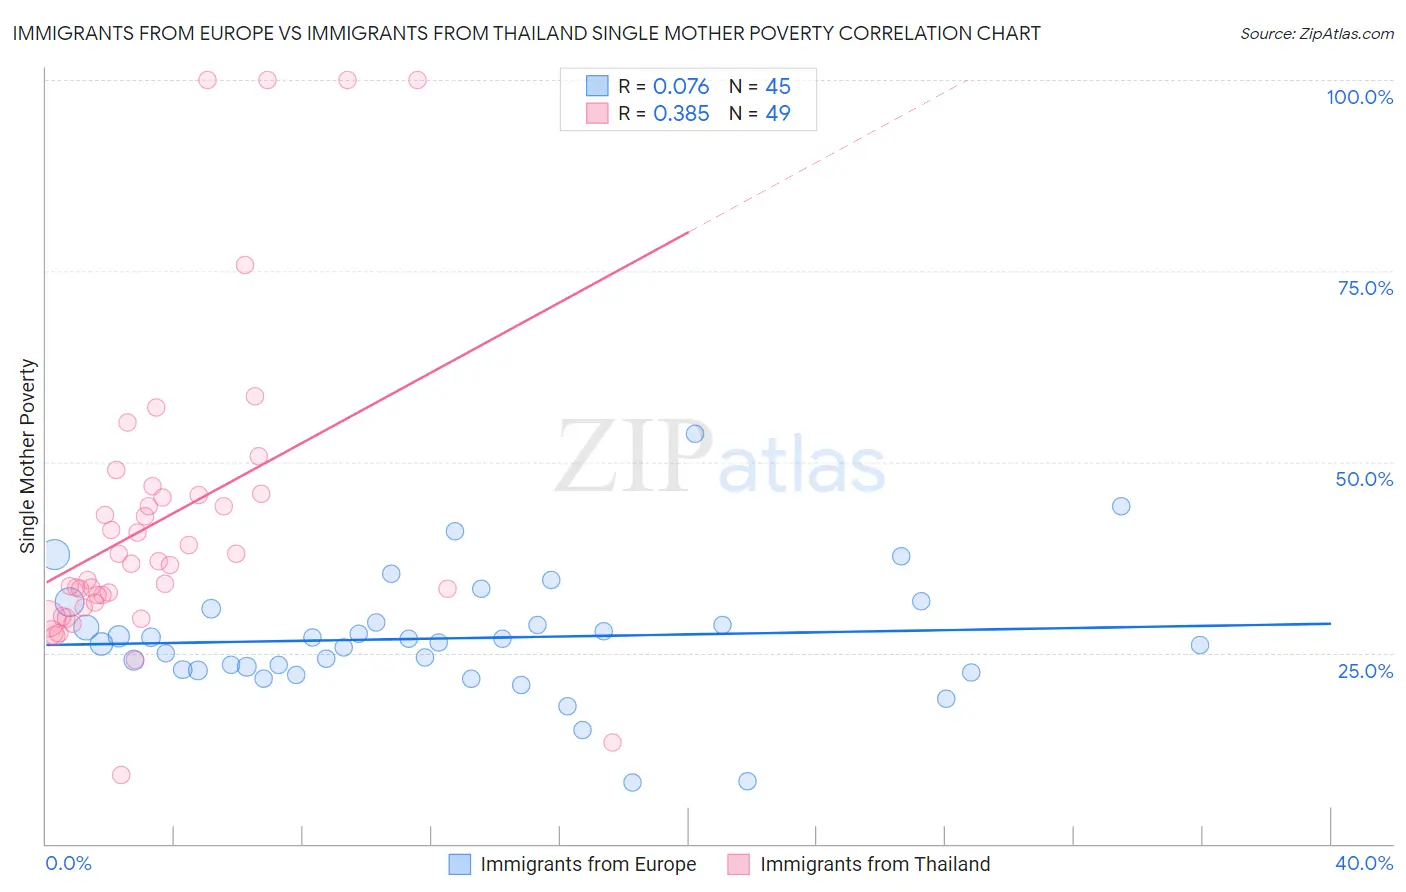 Immigrants from Europe vs Immigrants from Thailand Single Mother Poverty